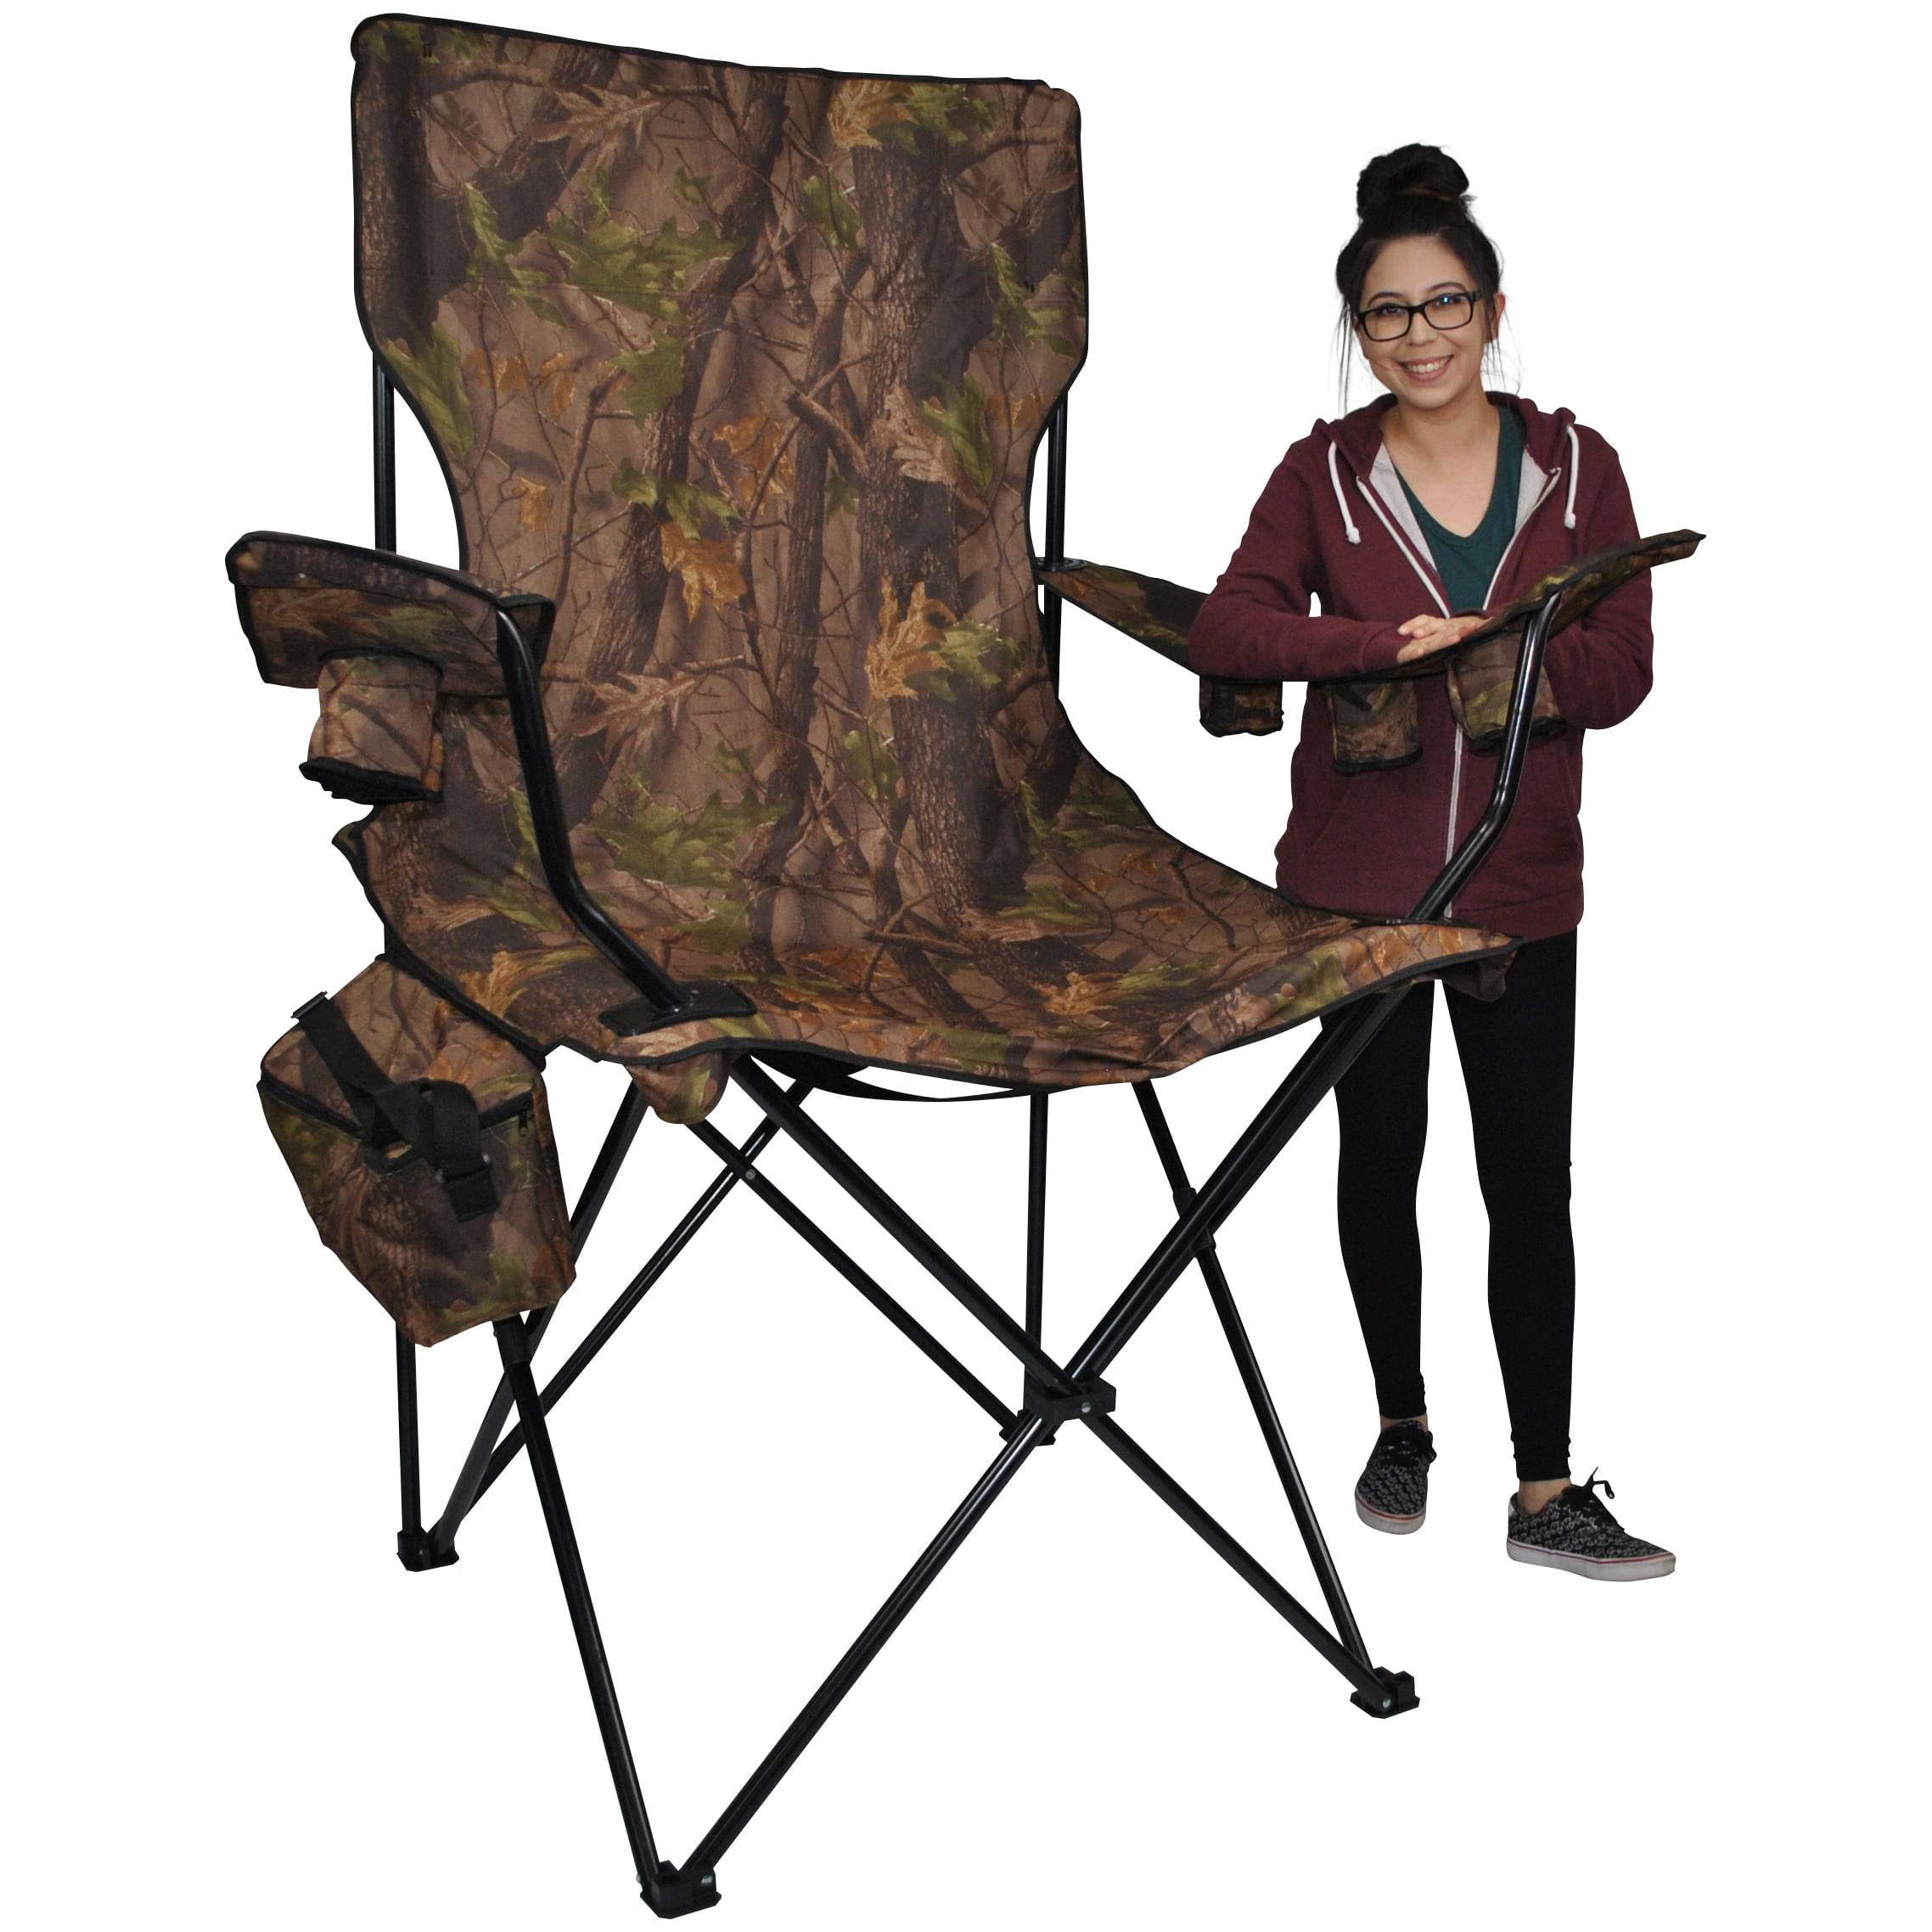 Giant Kingpin Folding Chair Chair With 6 Cup Holders Cooler Bag